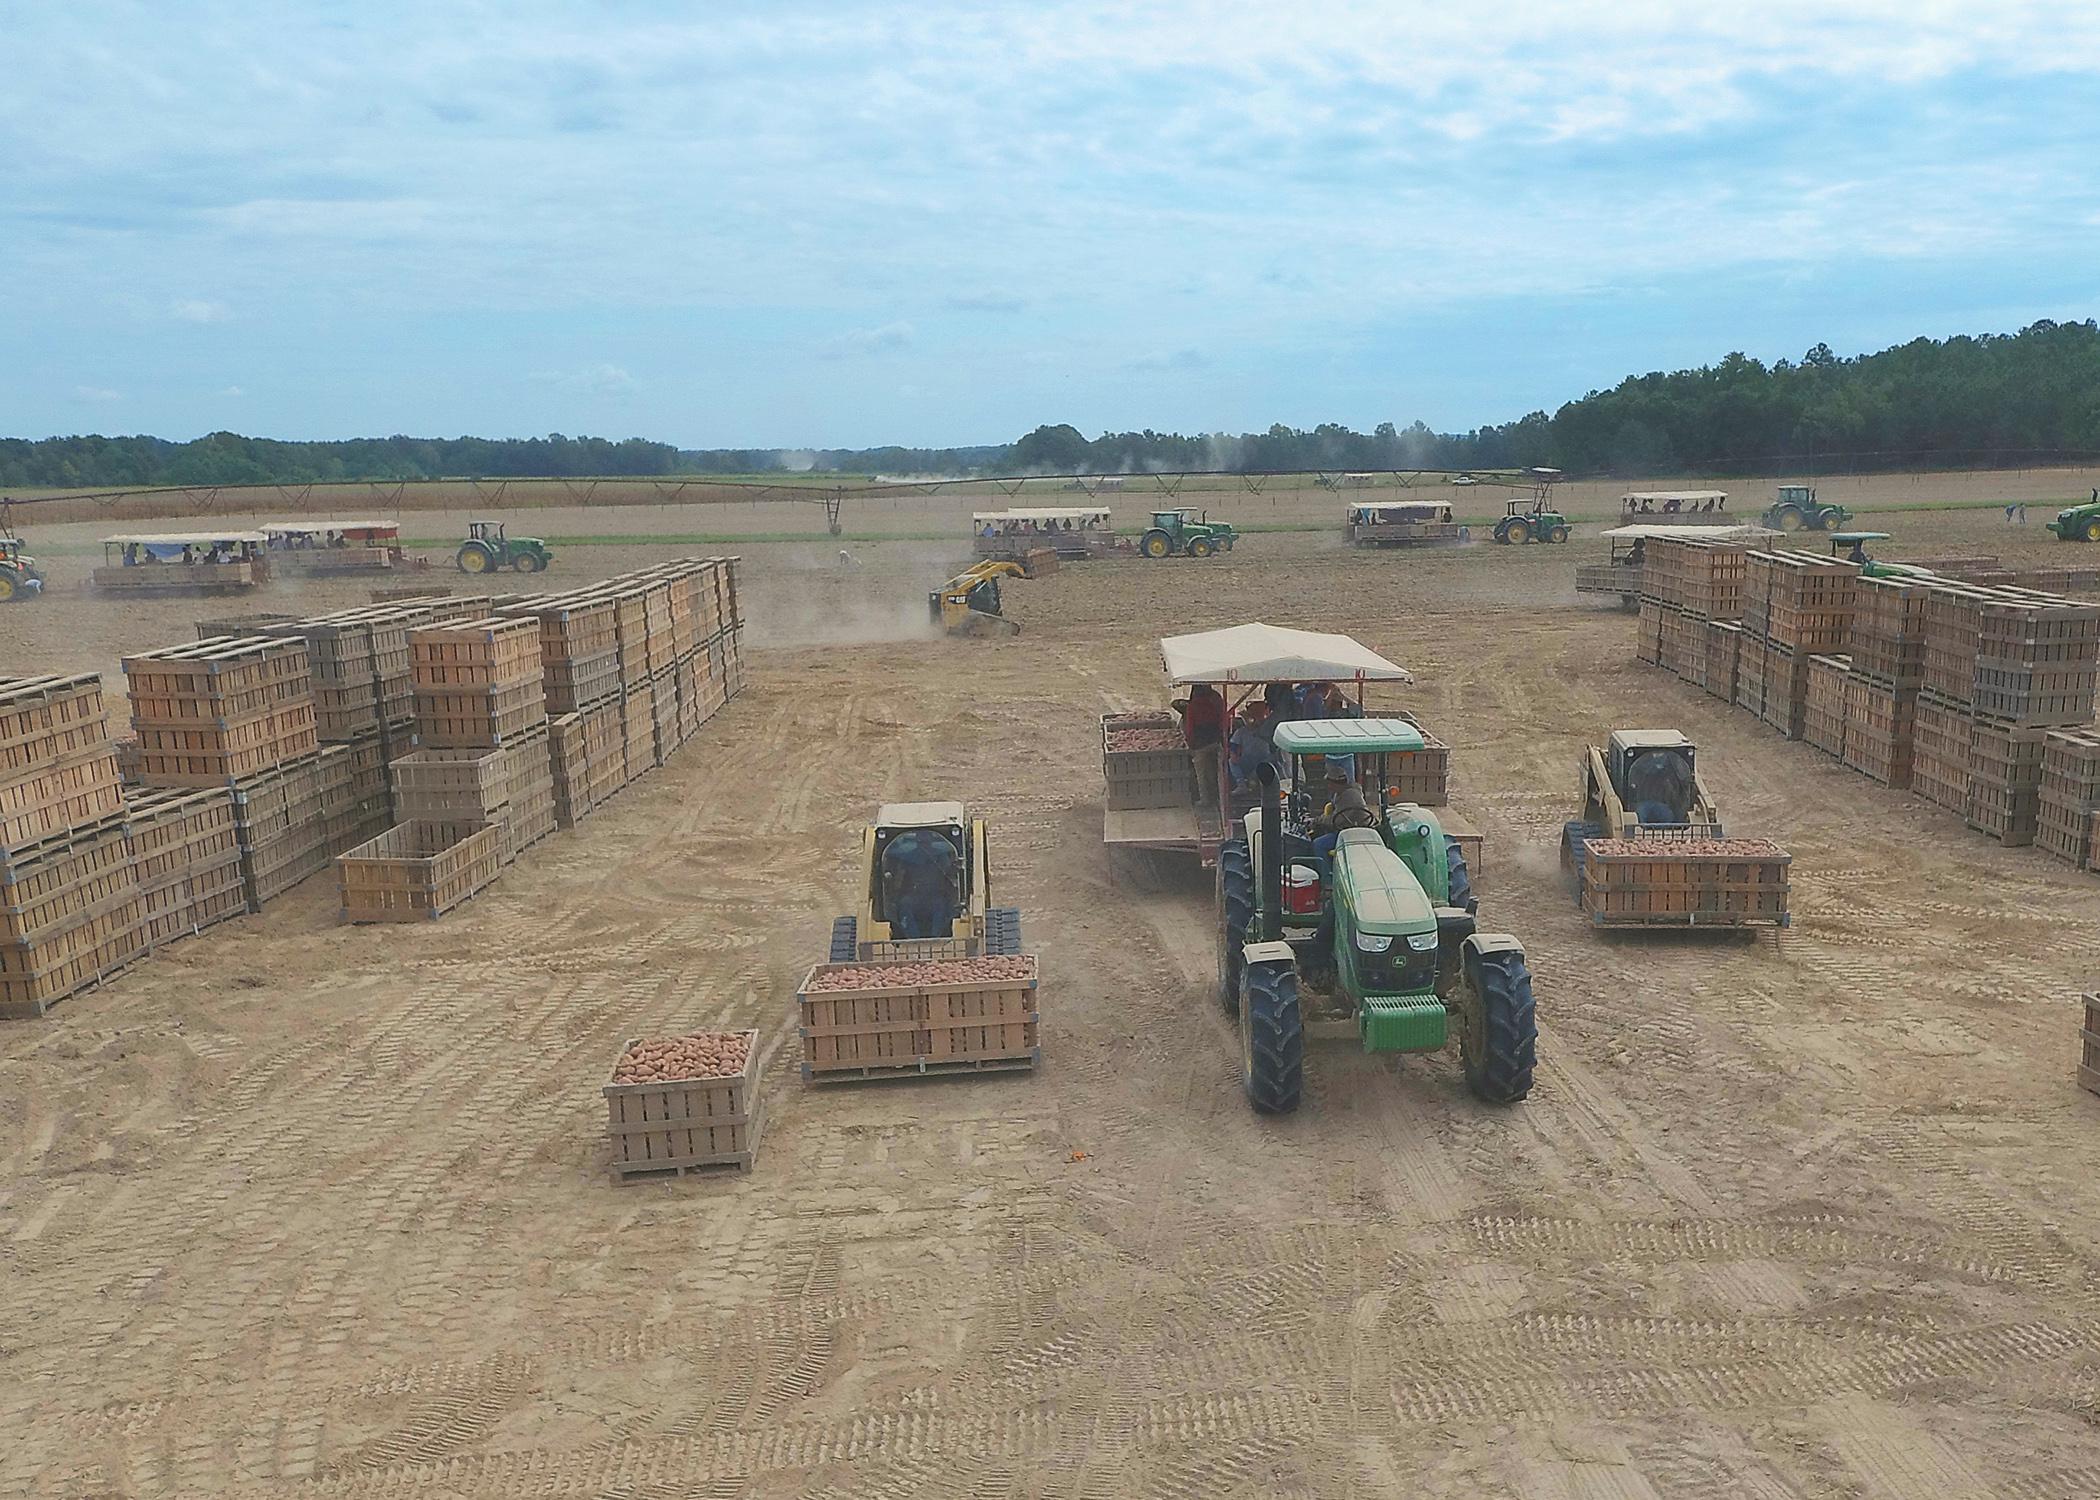 Overhead shot of a field with tractors and sweet potatoes in wooden bins.